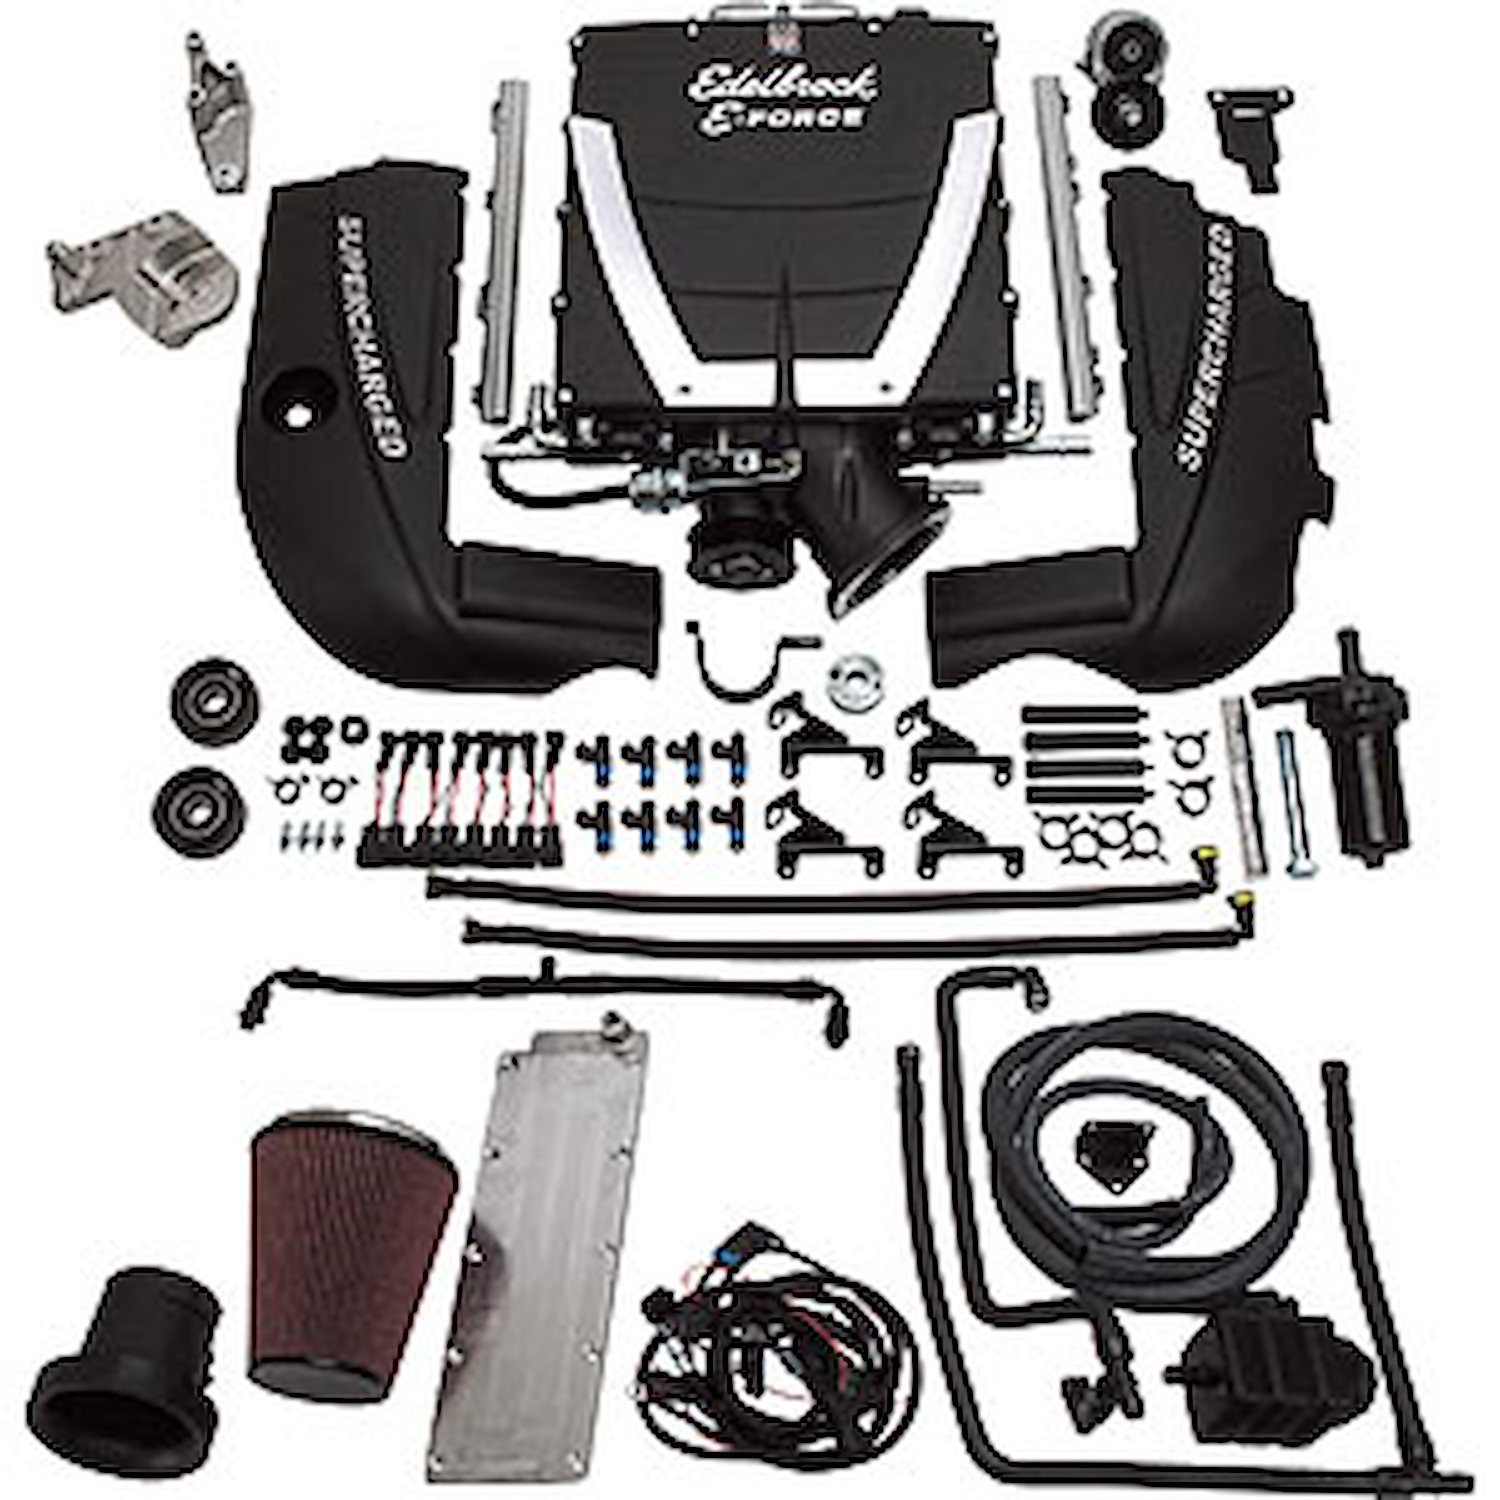 E-Force Universal Supercharger Kit for GM Gen III LS1 Engine with Corvette Accessory Drives